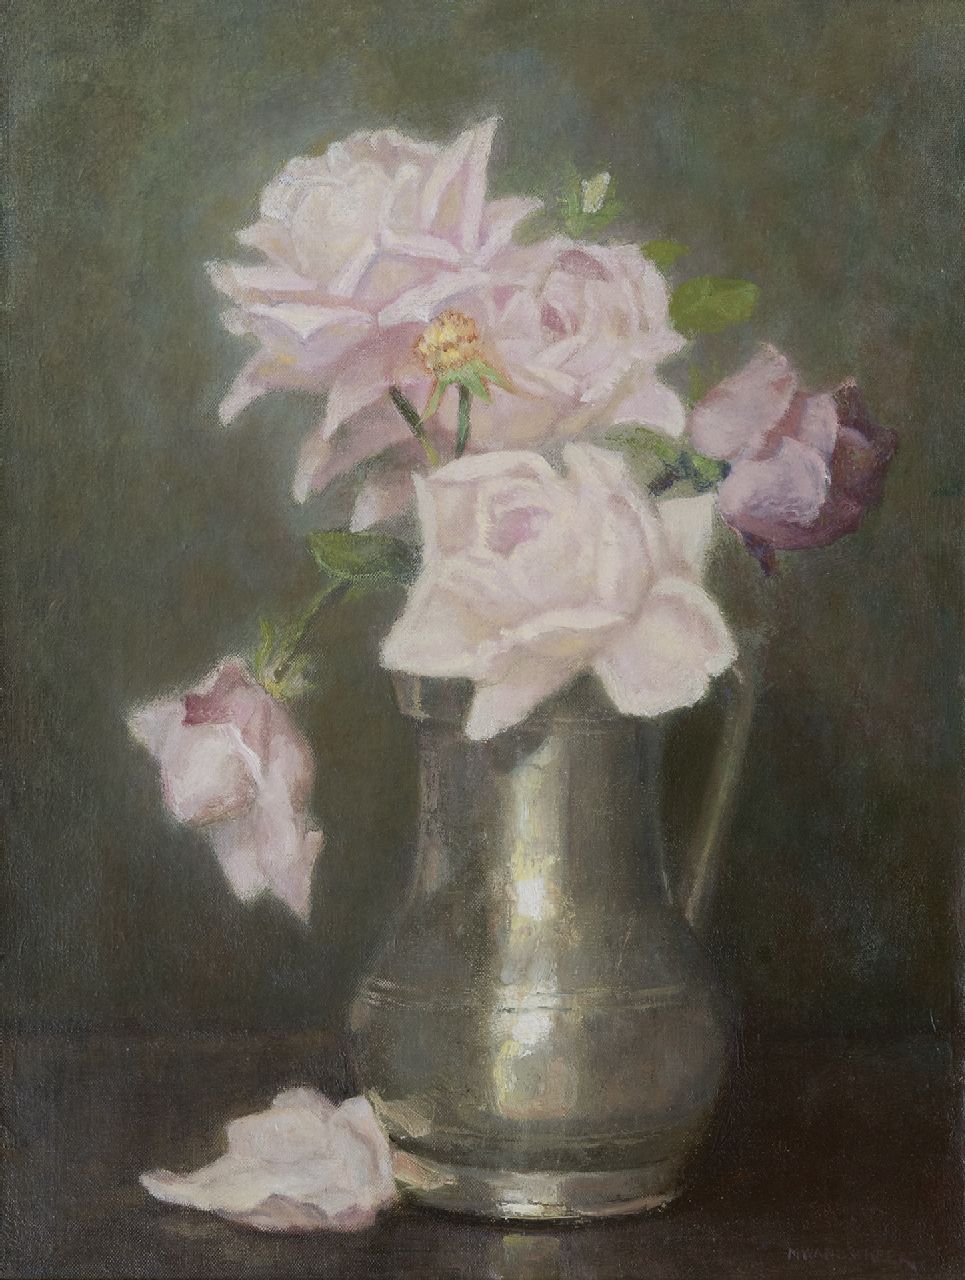 Wandscheer M.W.  | Maria Wilhelmina 'Marie' Wandscheer | Paintings offered for sale | Roses in a pewter vase, oil on canvas 41.5 x 31.4 cm, signed l.r. and on the stretcher